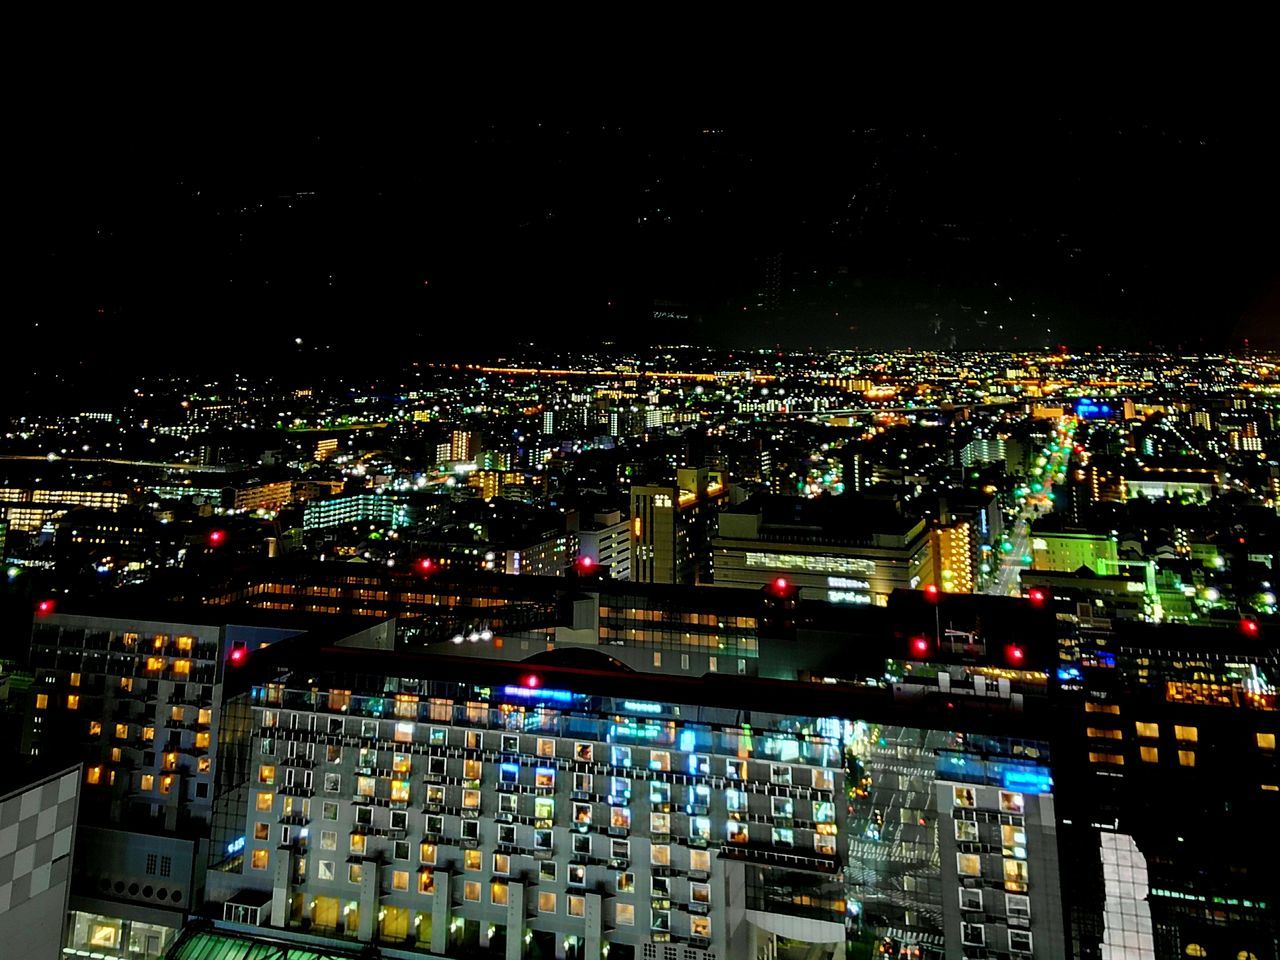 illuminated, night, city, cityscape, architecture, building exterior, built structure, crowded, skyscraper, aerial view, travel destinations, sky, modern, city life, outdoors, development, tall - high, capital cities, multi colored, spire, no people, financial district, tourism